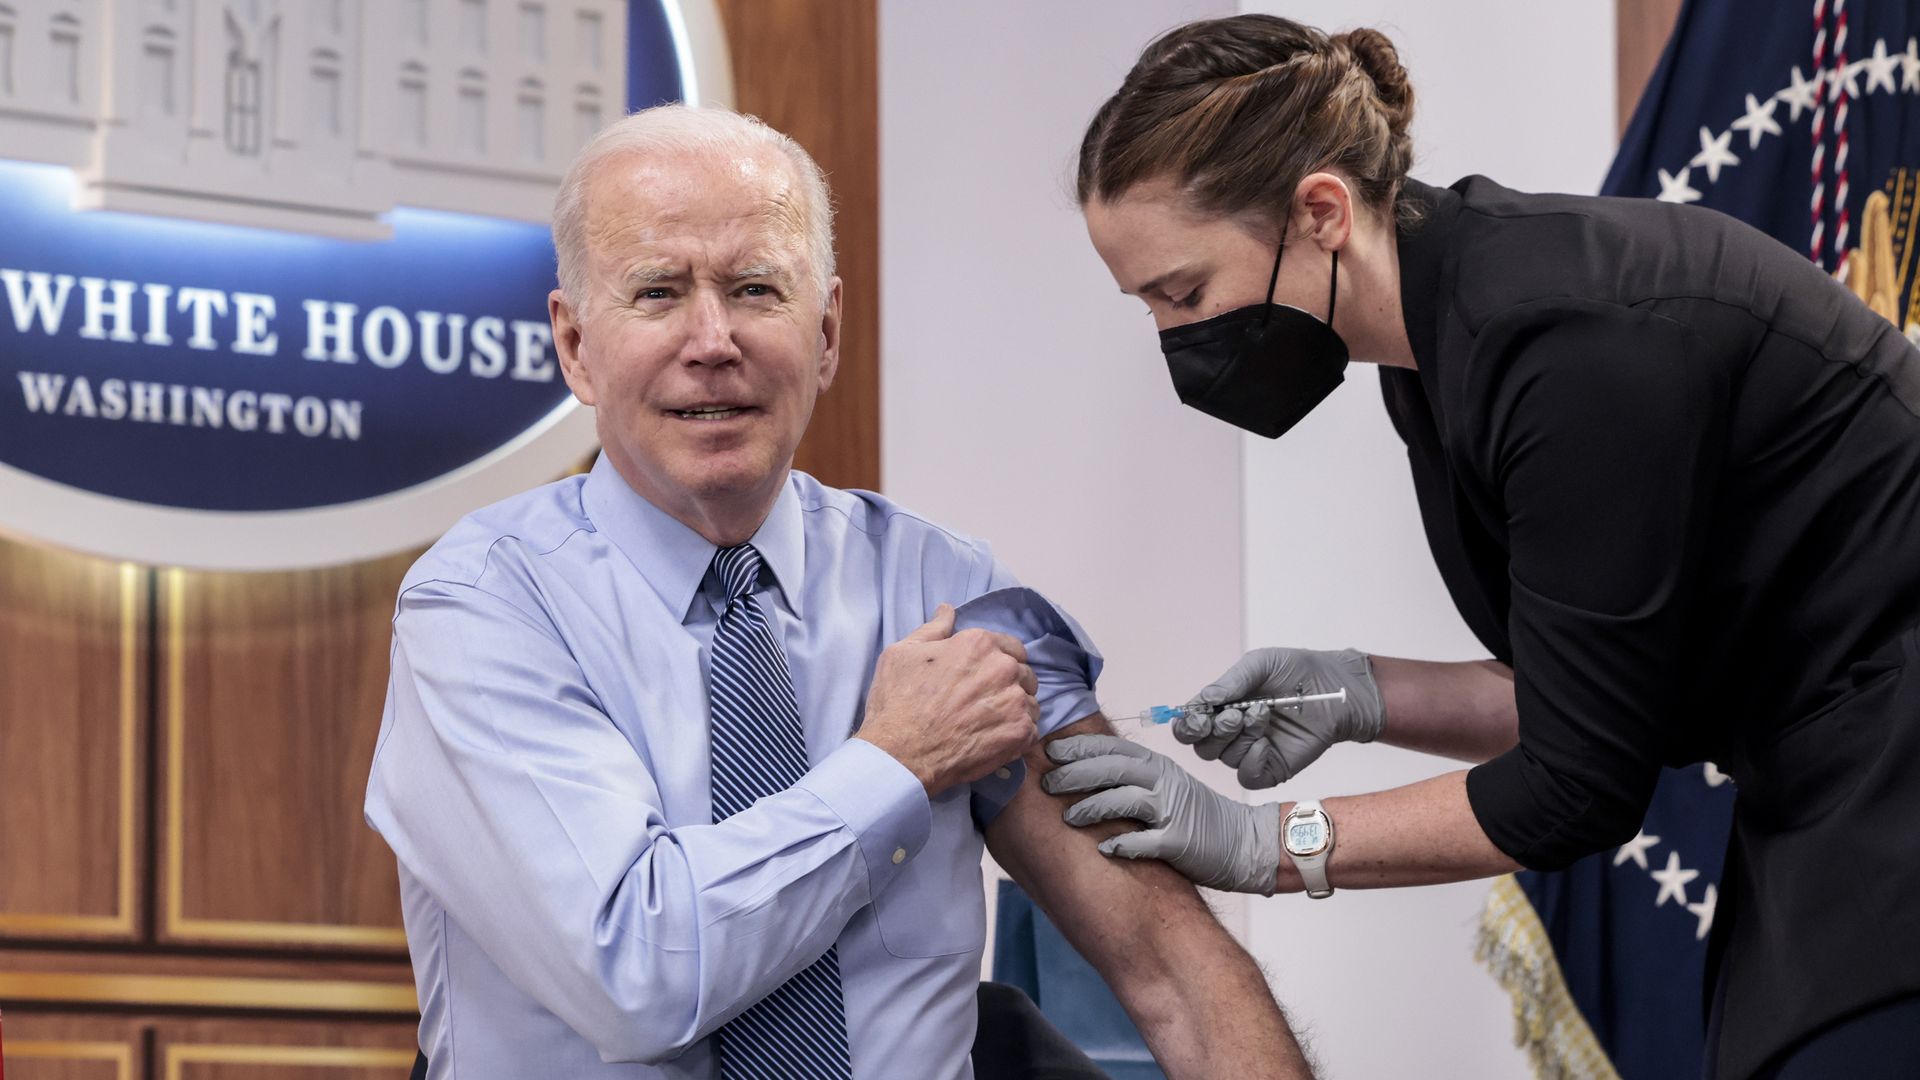 Biden gets his second COVID booster.